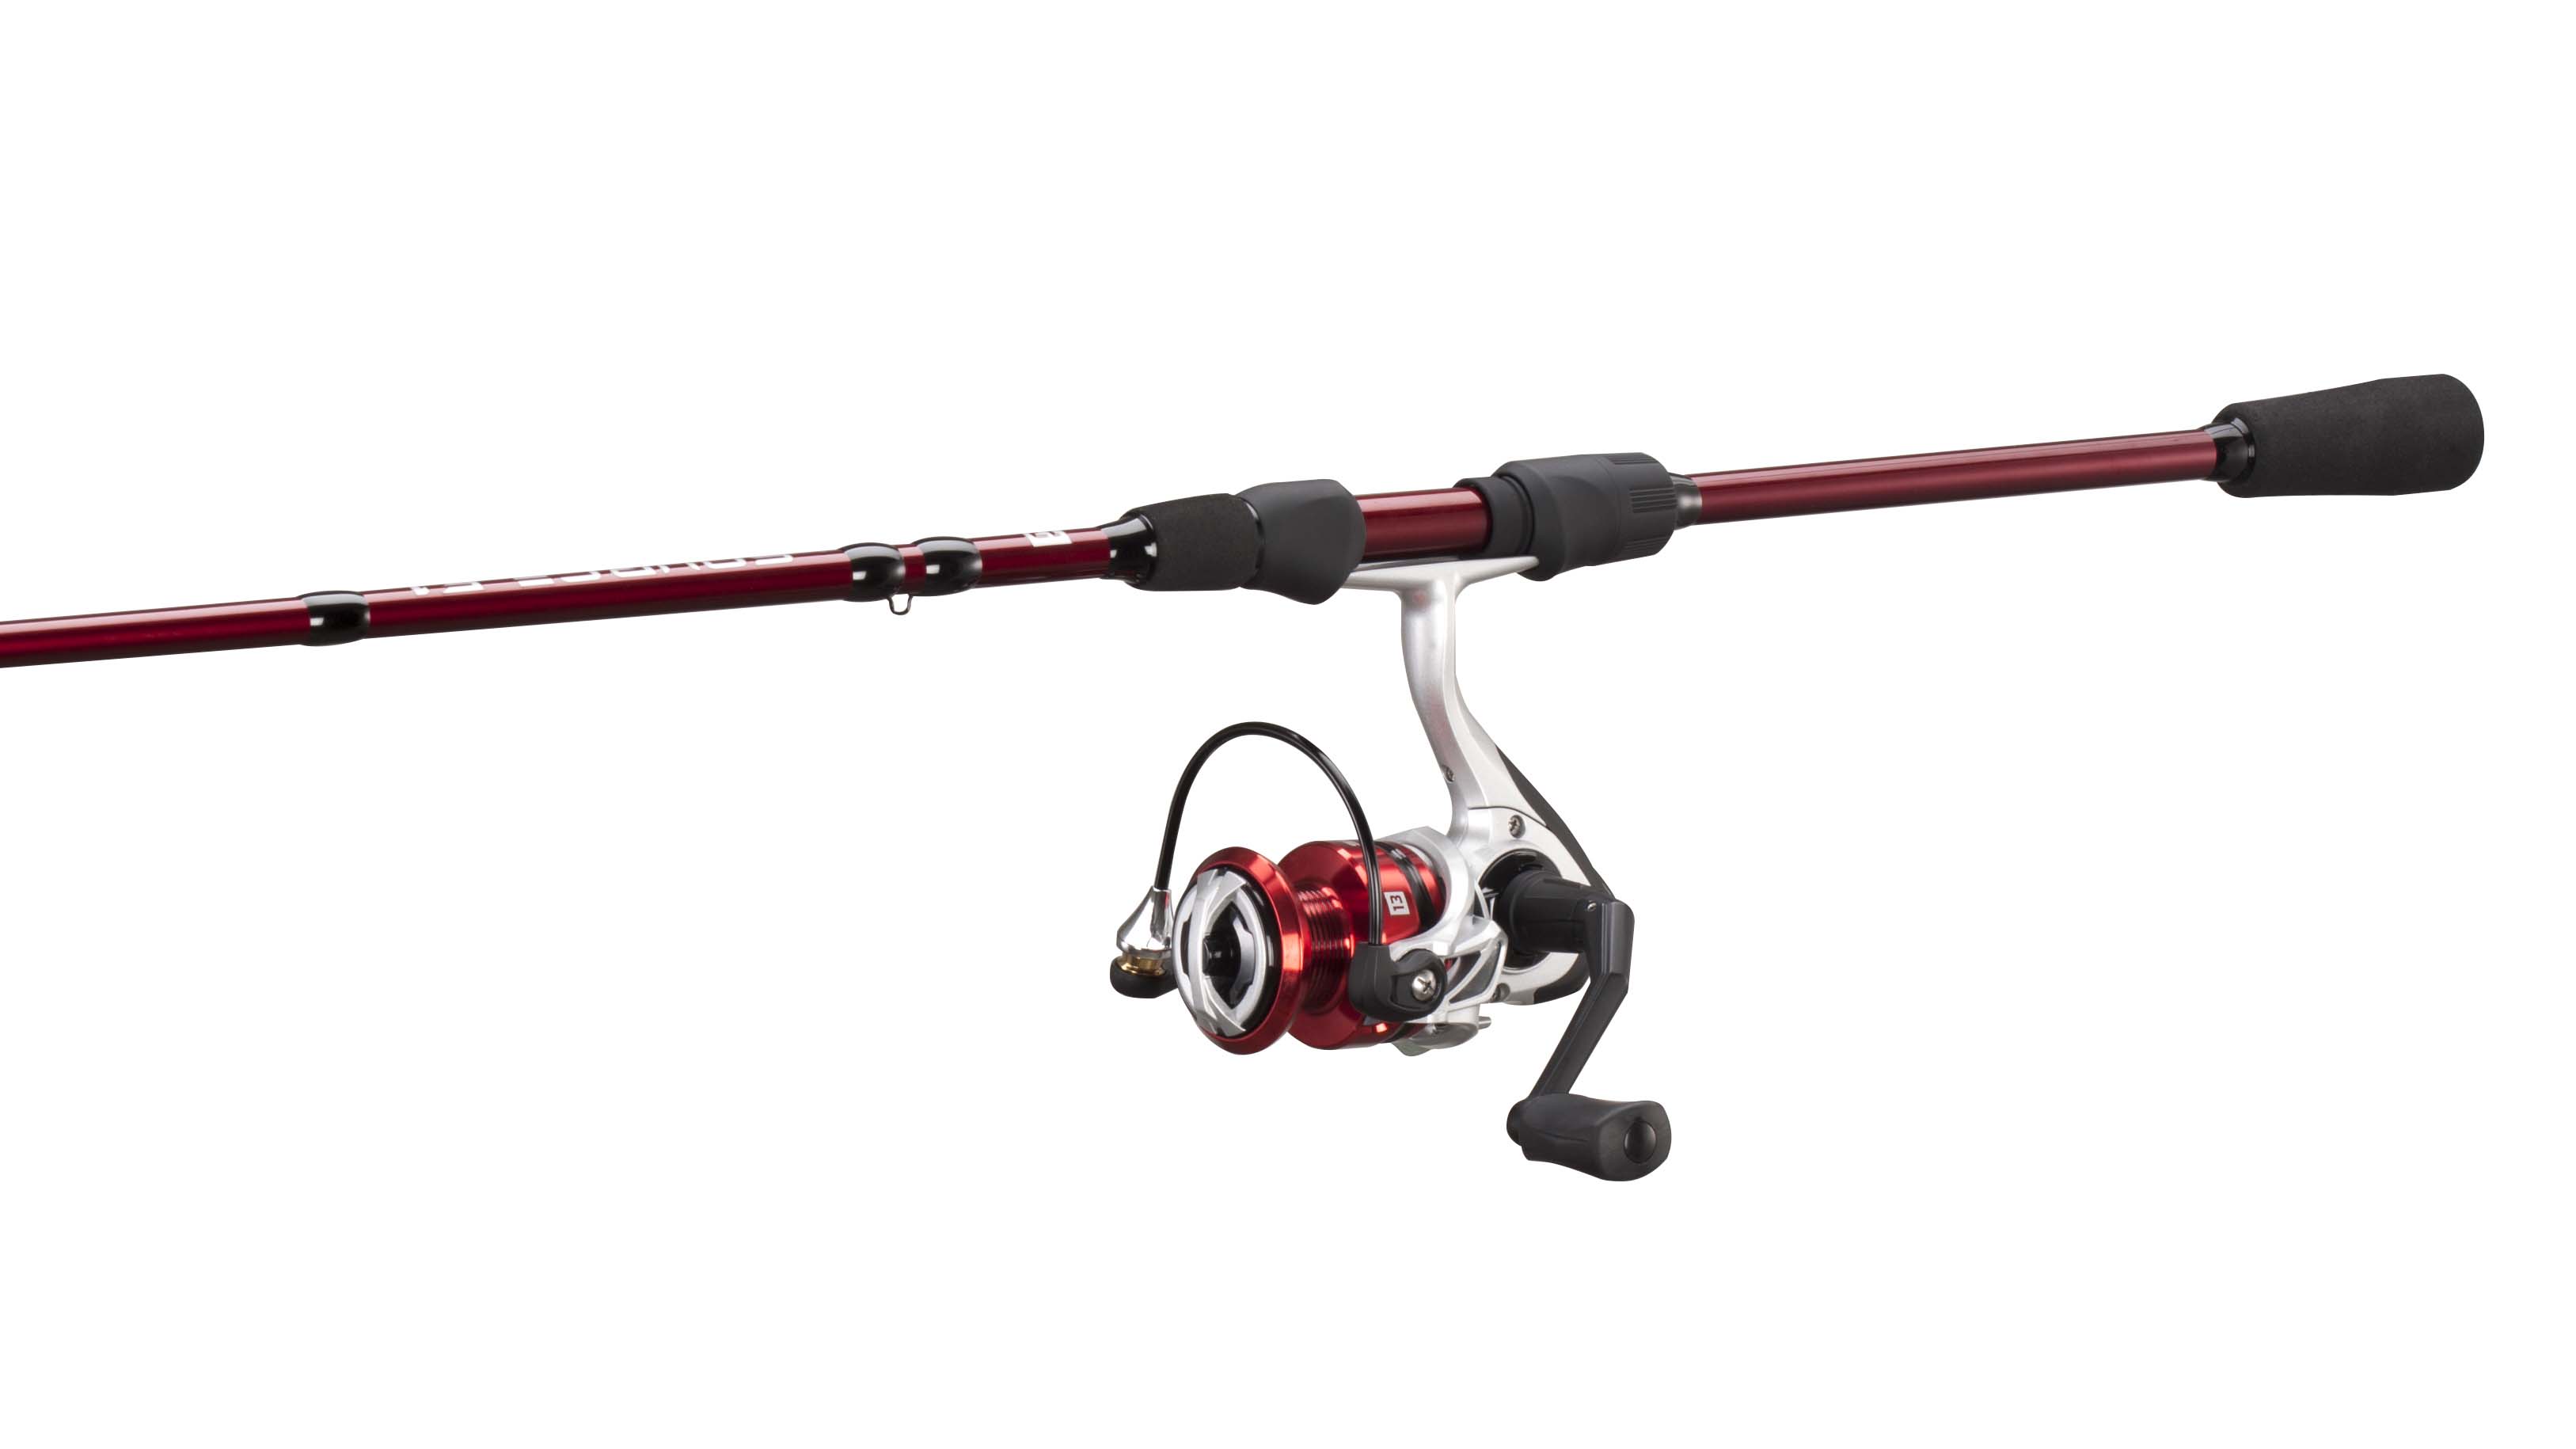 https://op1.0ps.us/original/opplanet-13-fishing-source-f1-m-spinning-combo-2000-size-reel-fast-action-fresh-gray-6ft7in-sorf1-sc67m-main